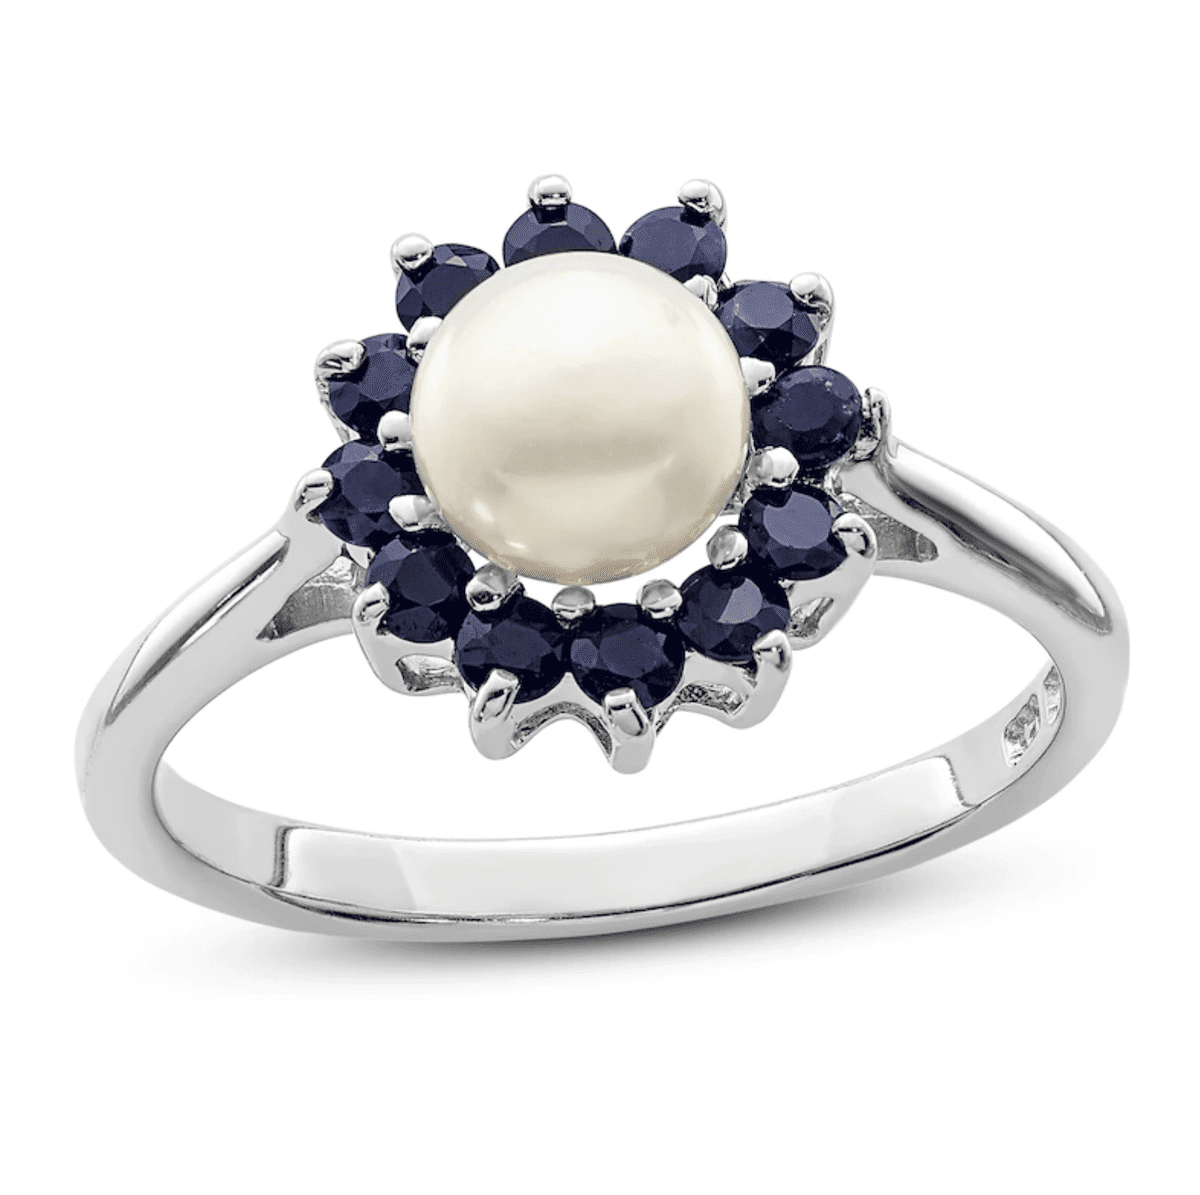 Freshwater Pearl Engagement Ring with Sapphires